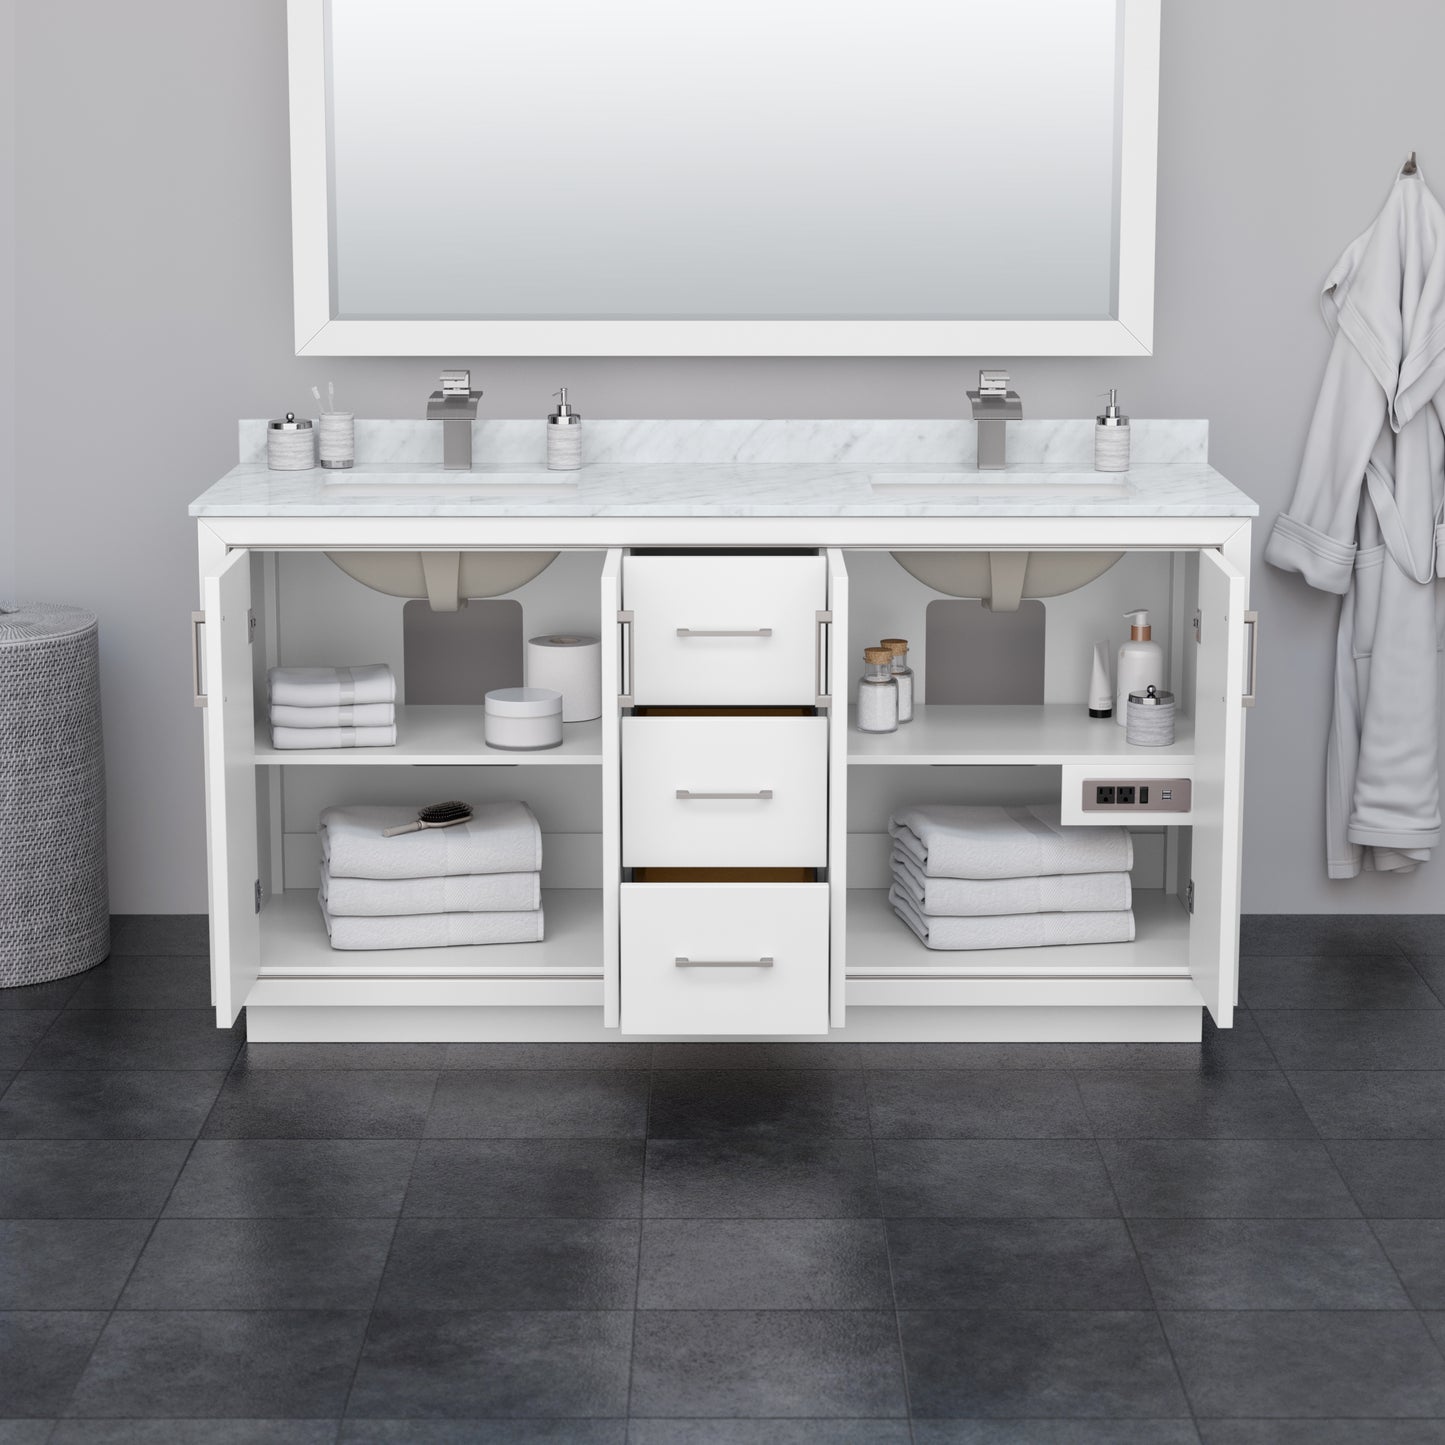 Wyndham Icon 66 Inch Double Bathroom Vanity White Cultured Marble Countertop with Undermount Square Sinks, Brushed Nickel Trim and 58 Inch Mirror - Luxe Bathroom Vanities